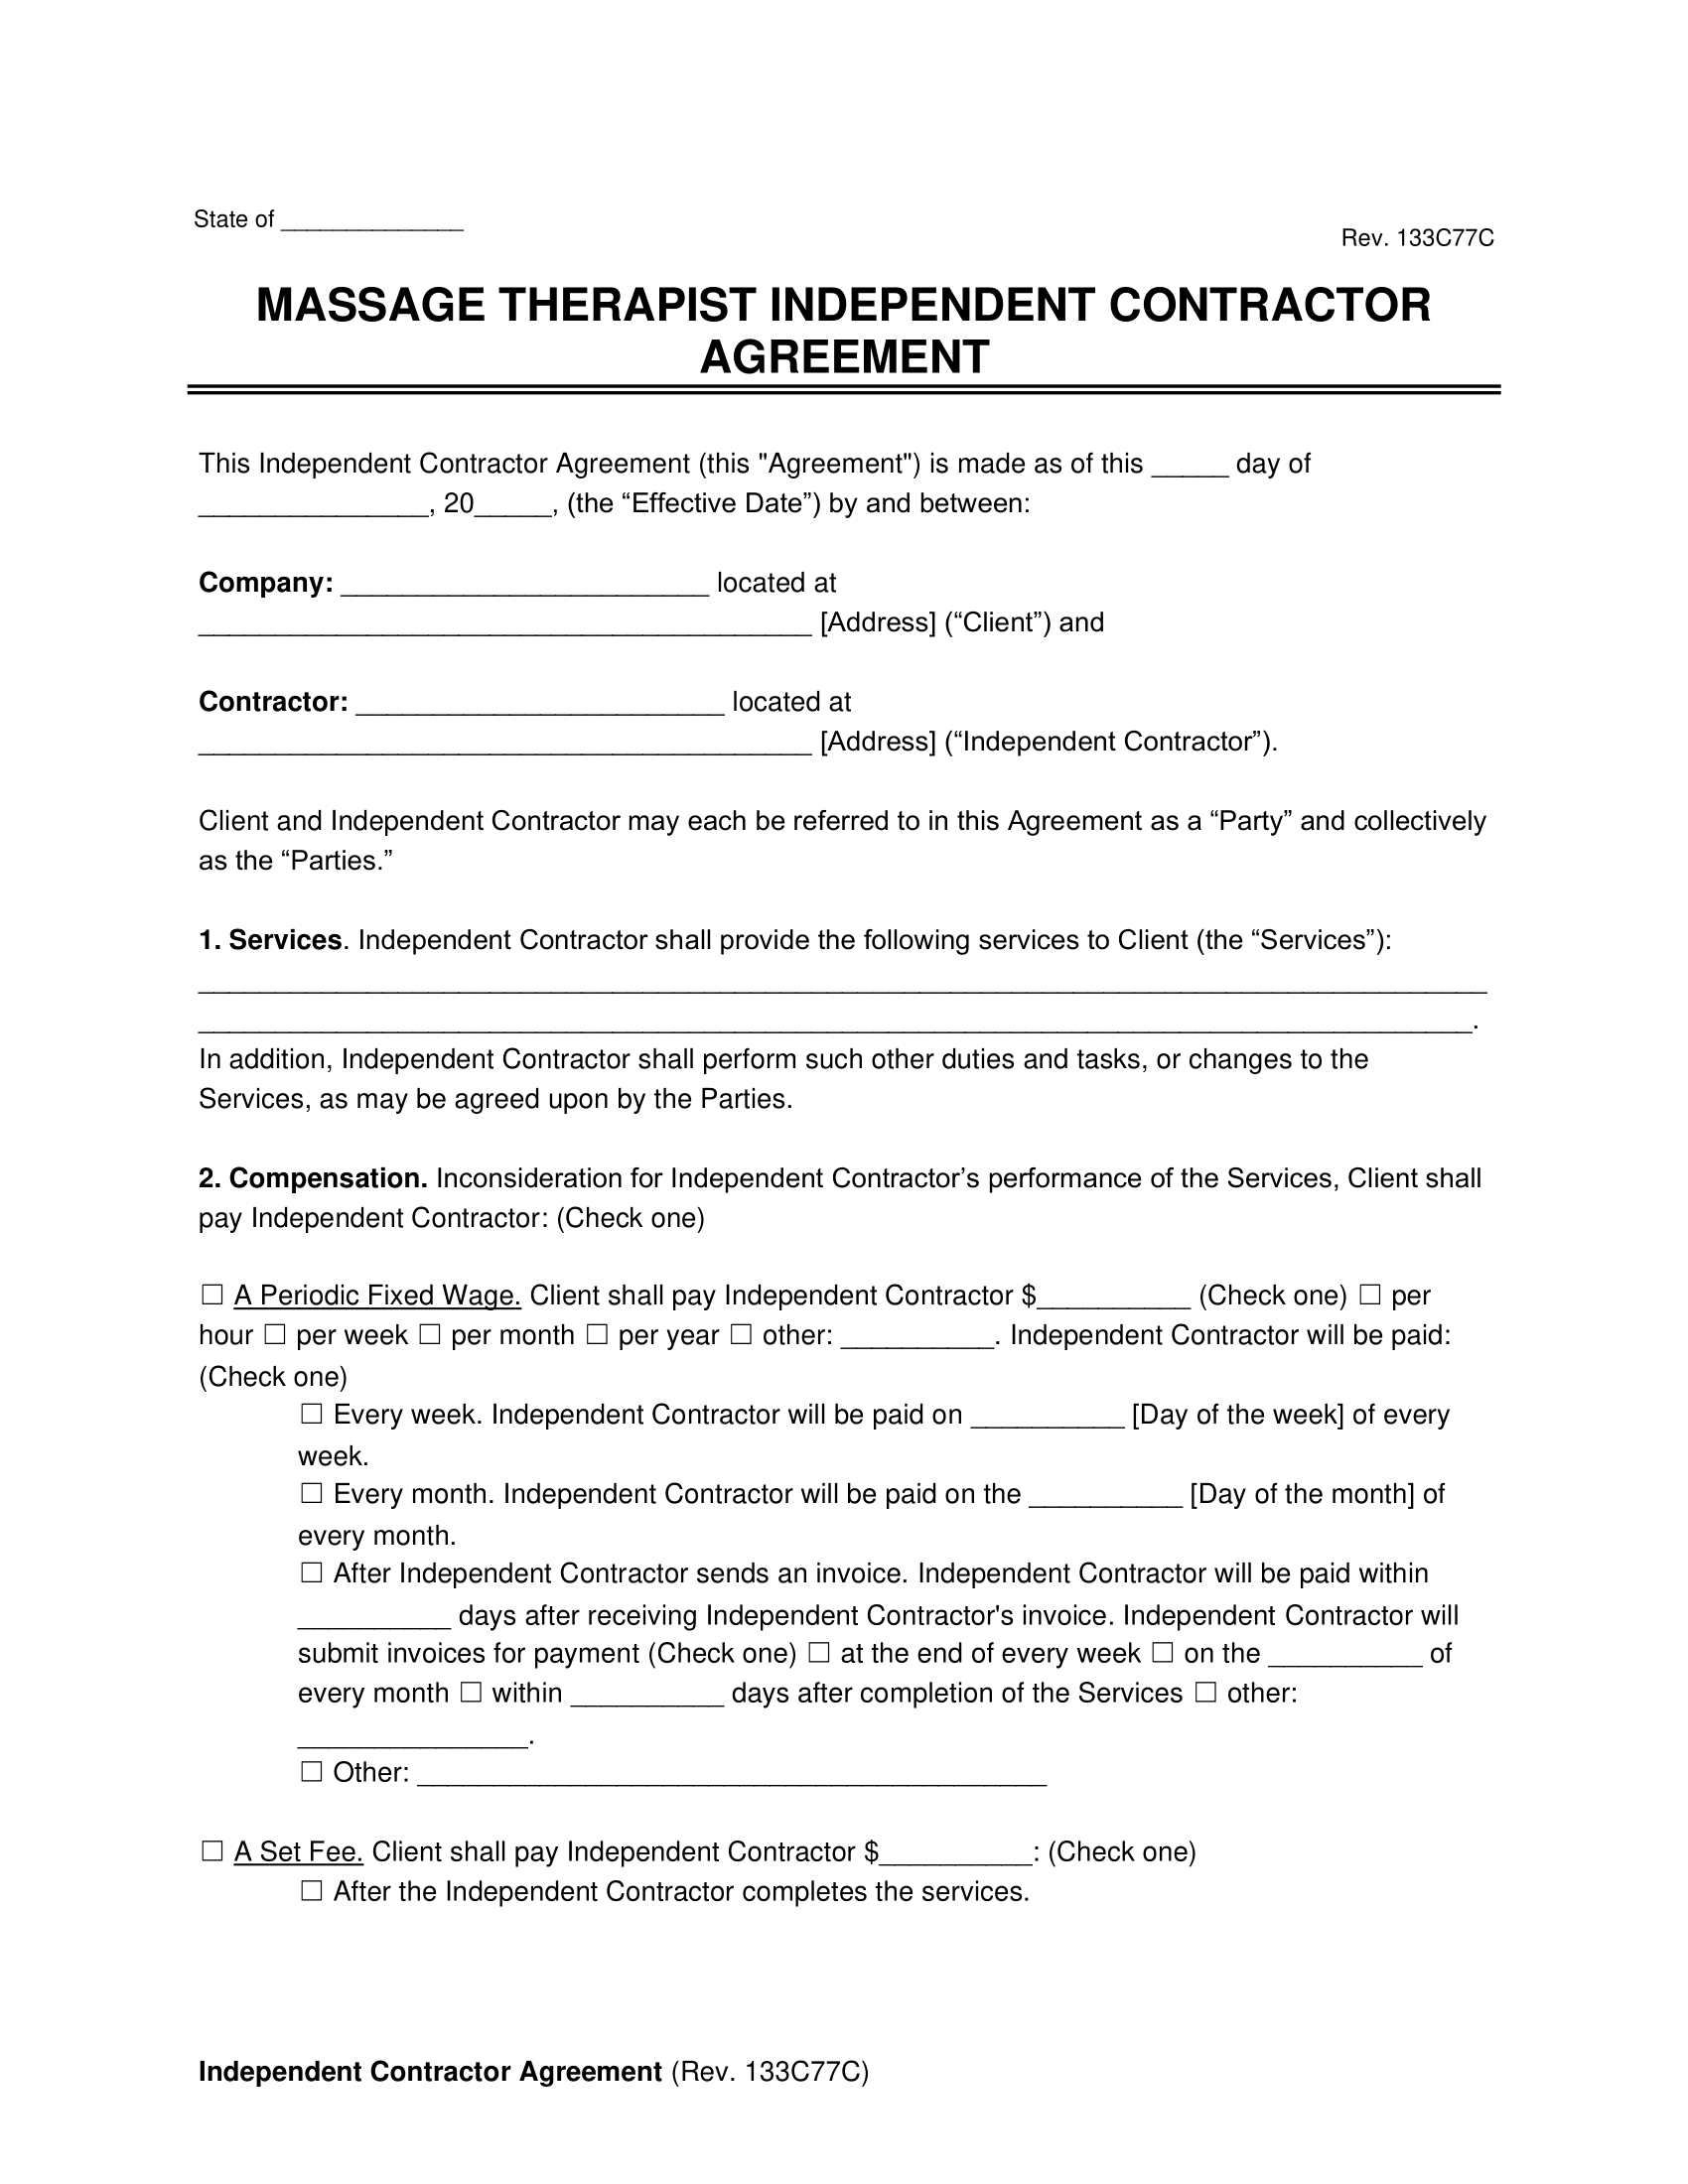 massage therapist service contract template